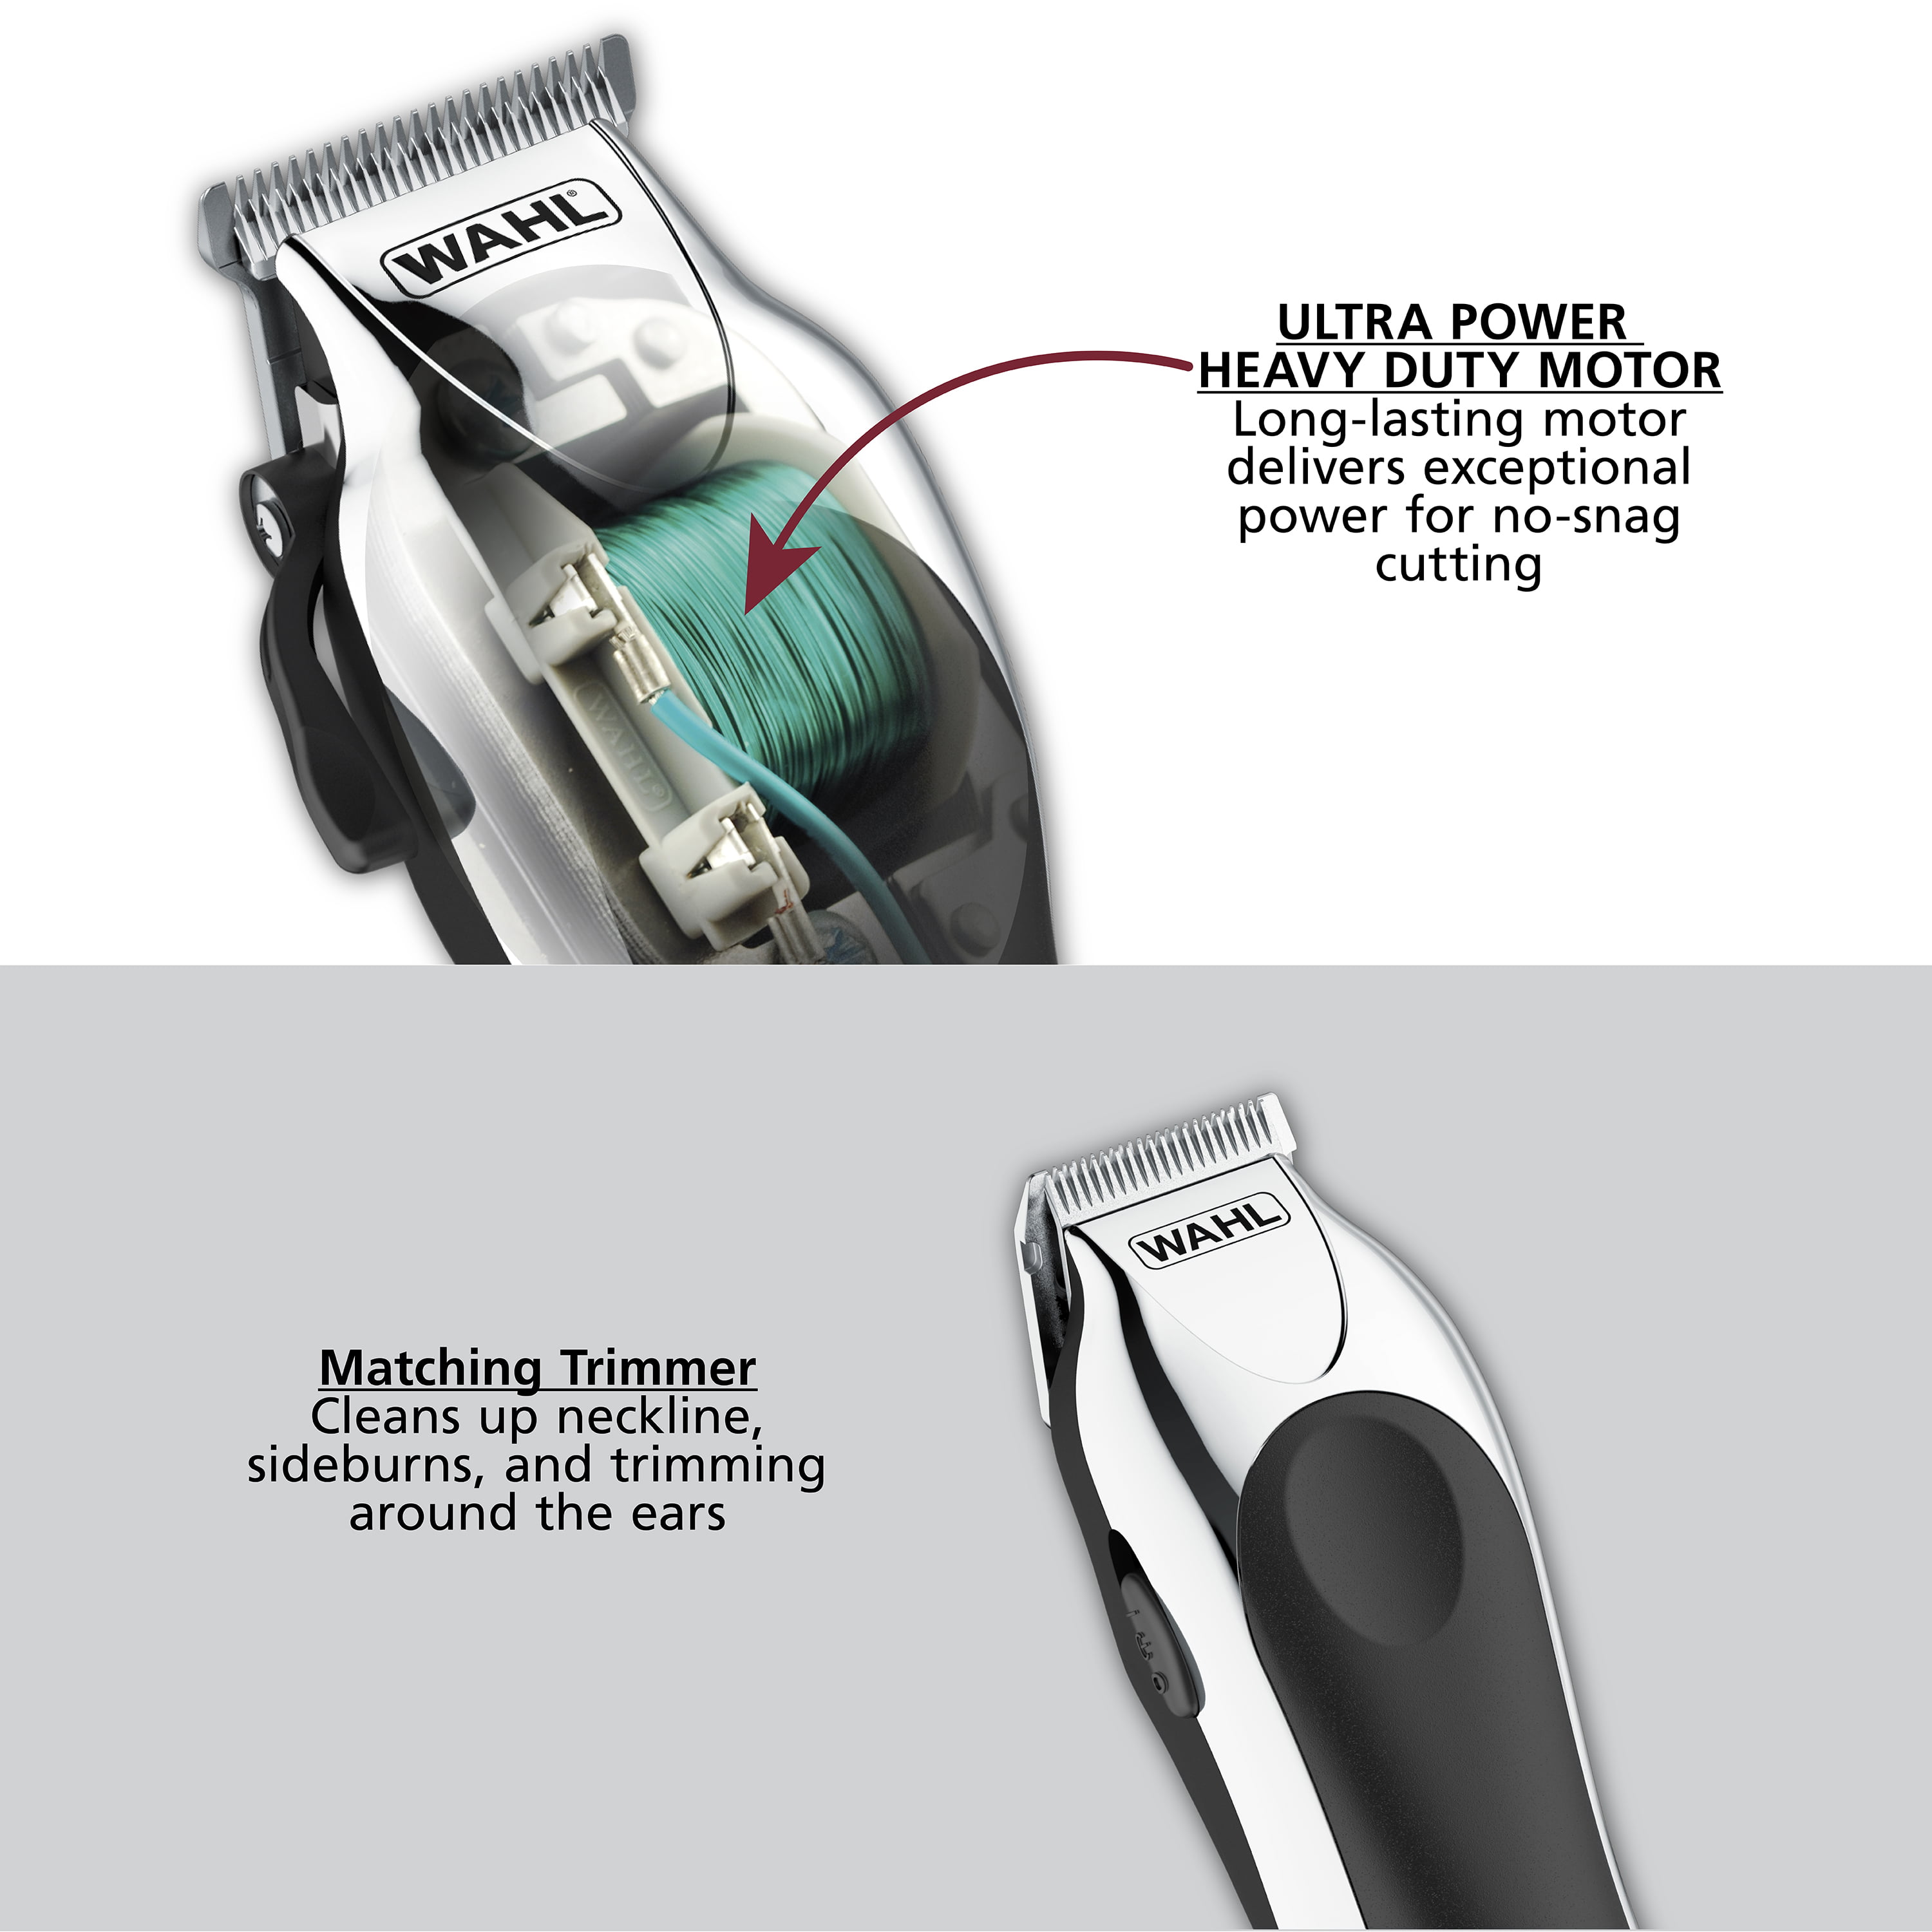 wahl deluxe chrome pro hair clipper kit